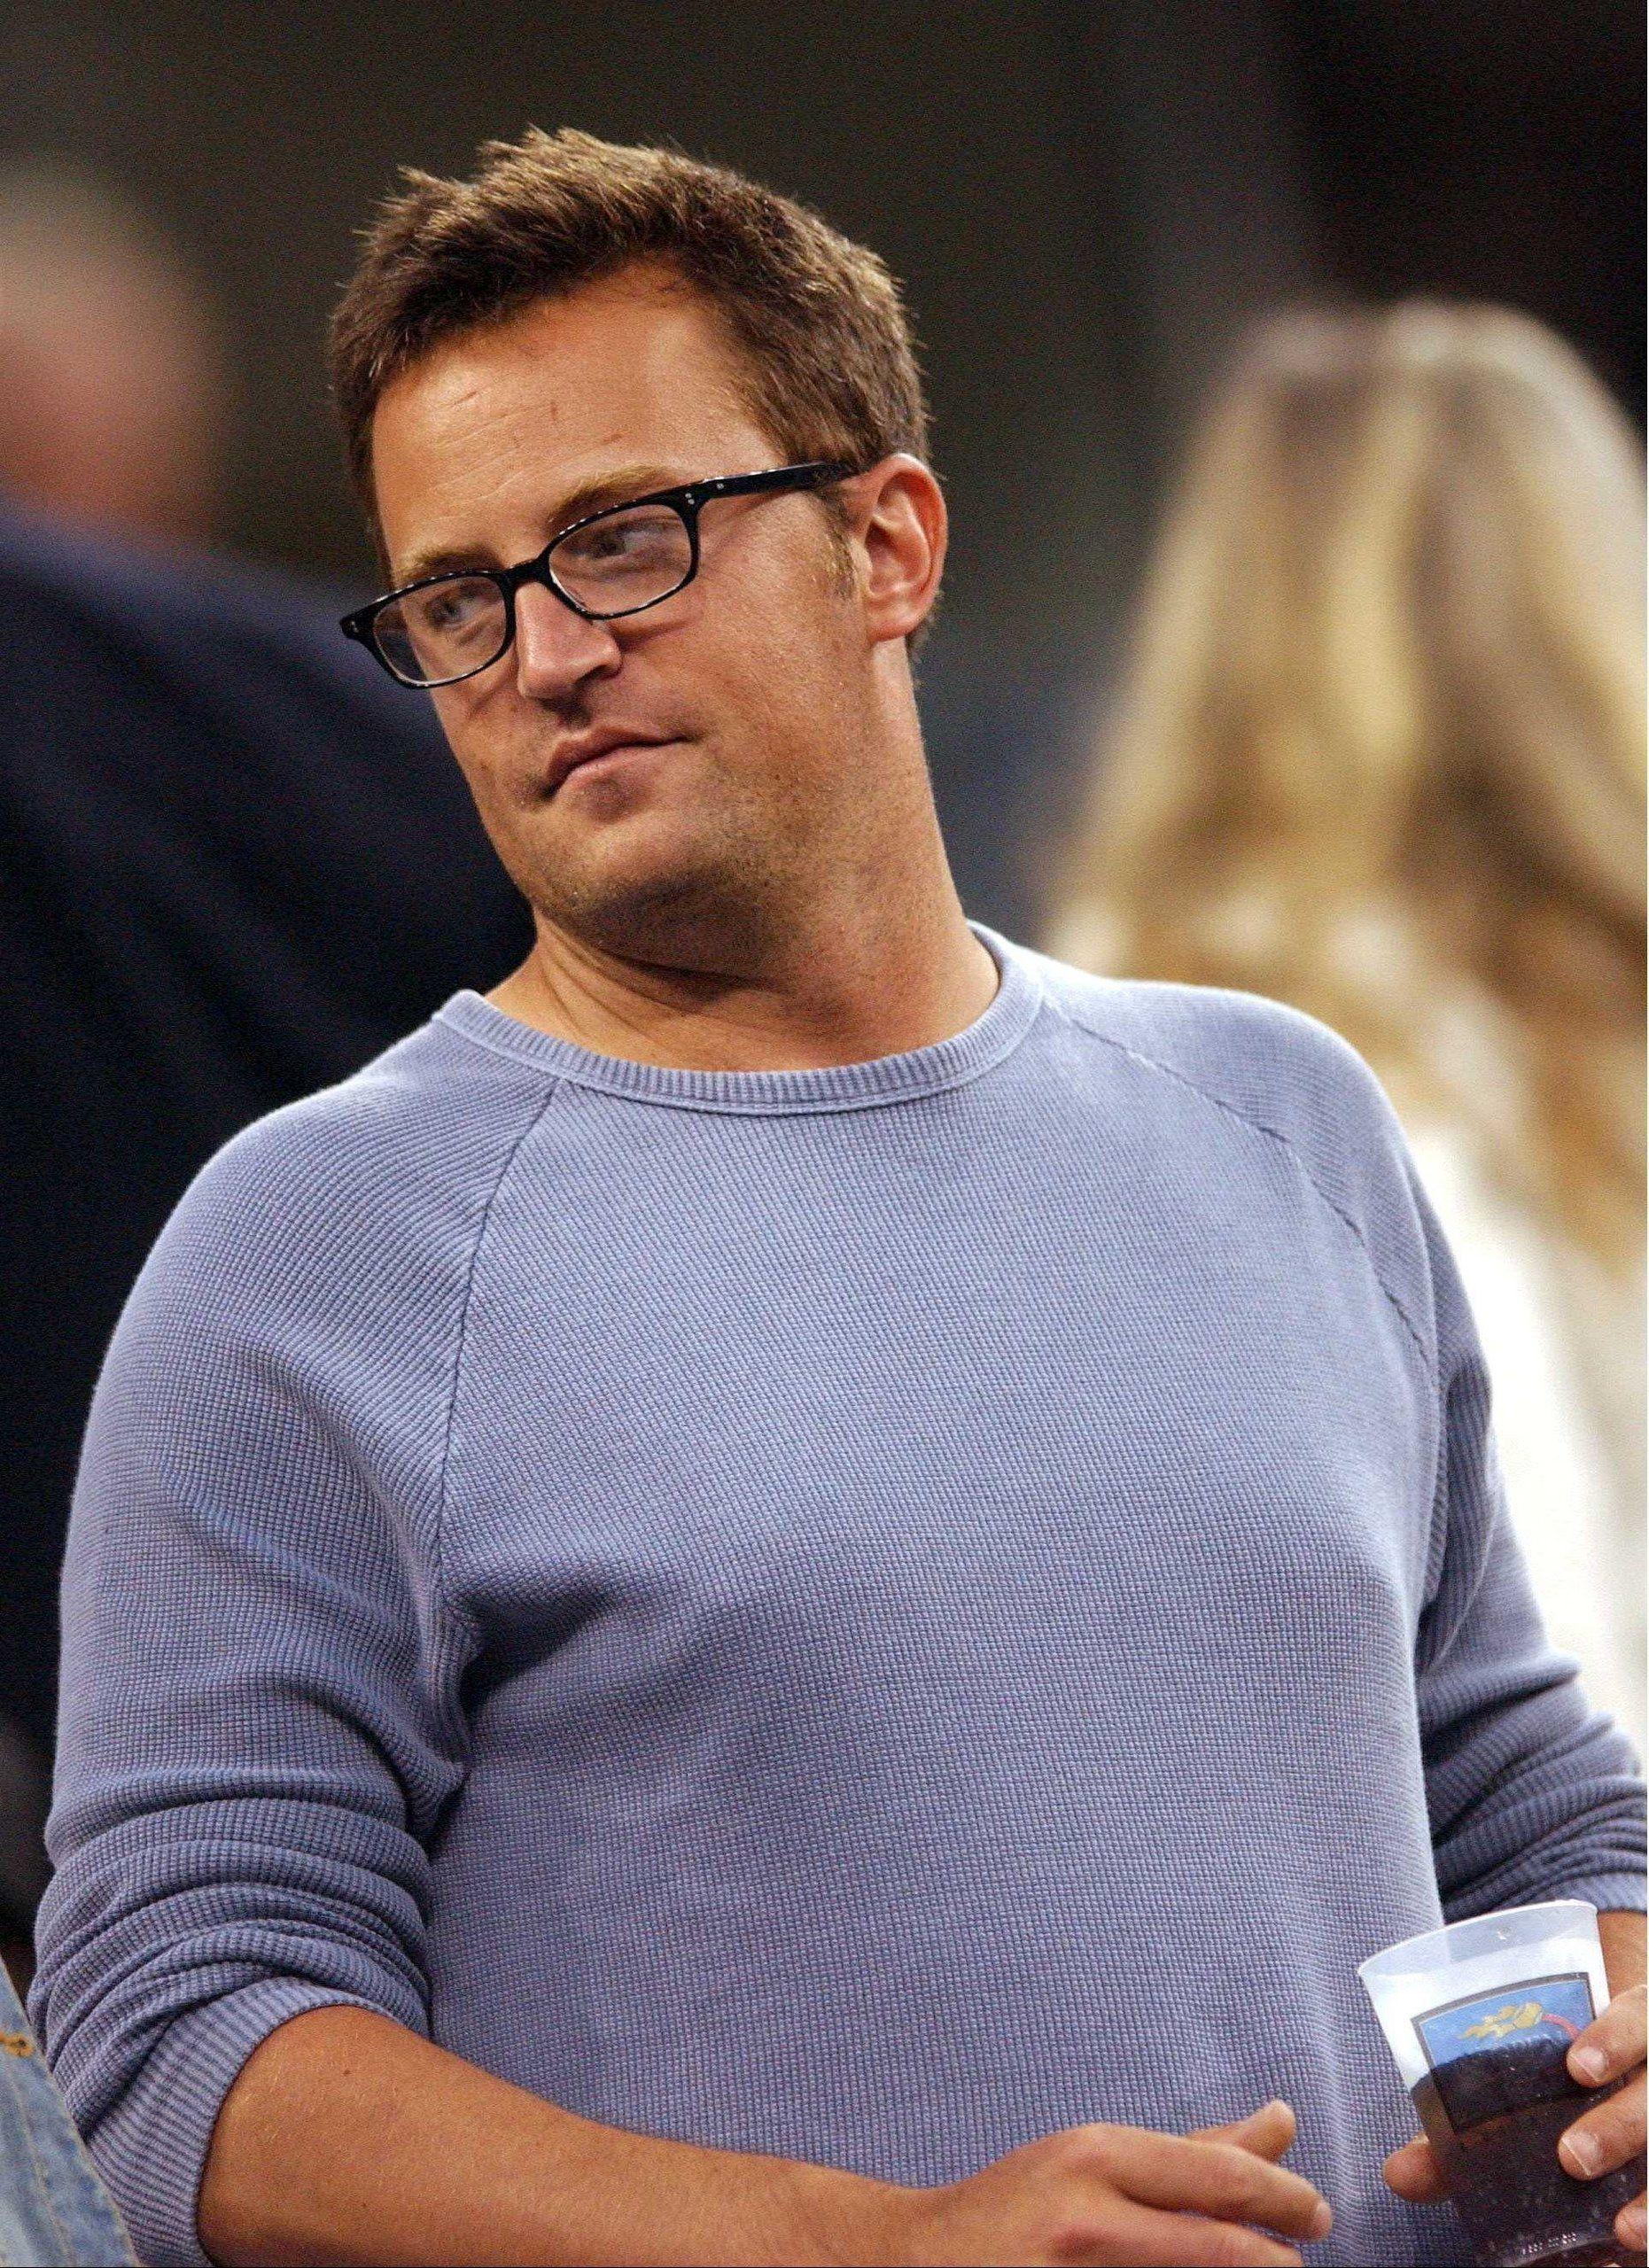 Matthew Perry in glasses.need I say more?. Matthew Perry